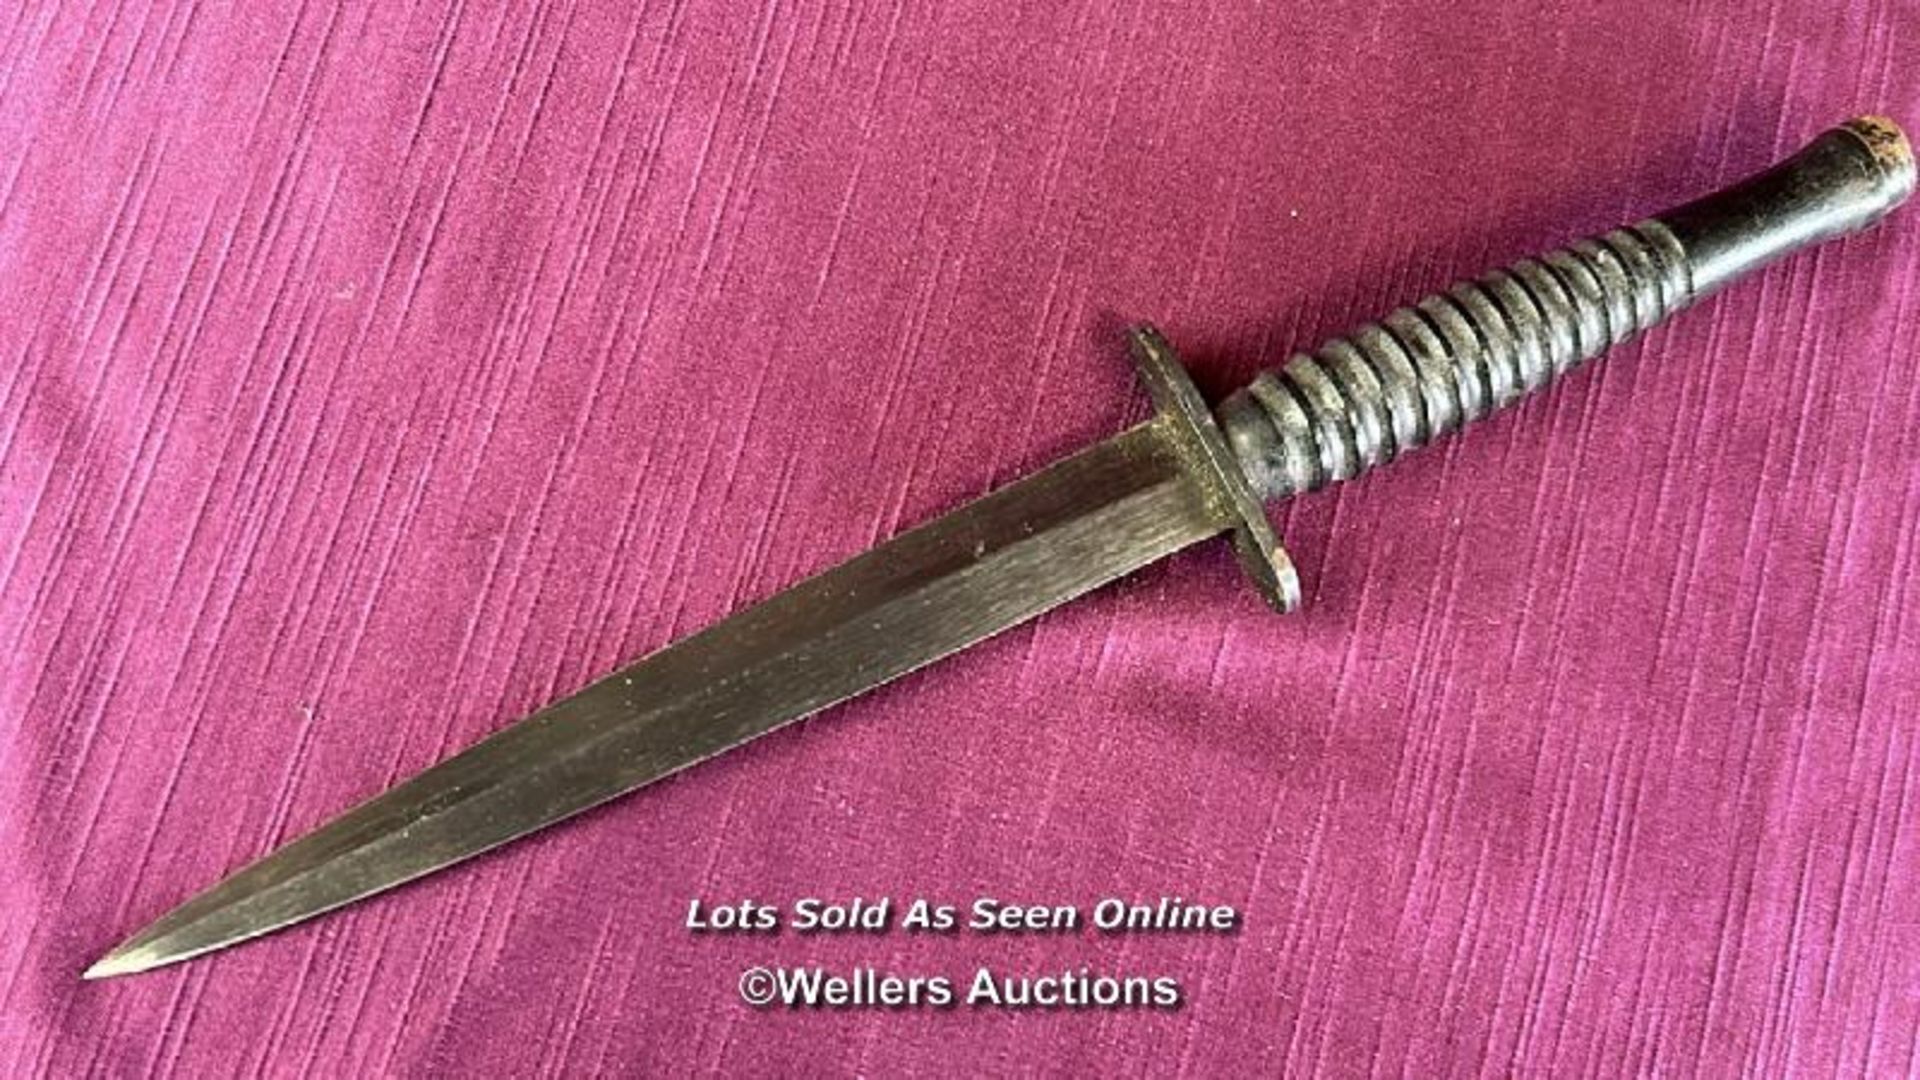 WORLD WAR TWO STYLE FAIRBAIRN-SYKES FIGHTING KNIFE WITH LEATHER SCABBARD, LENGTH 29CM - Image 4 of 6